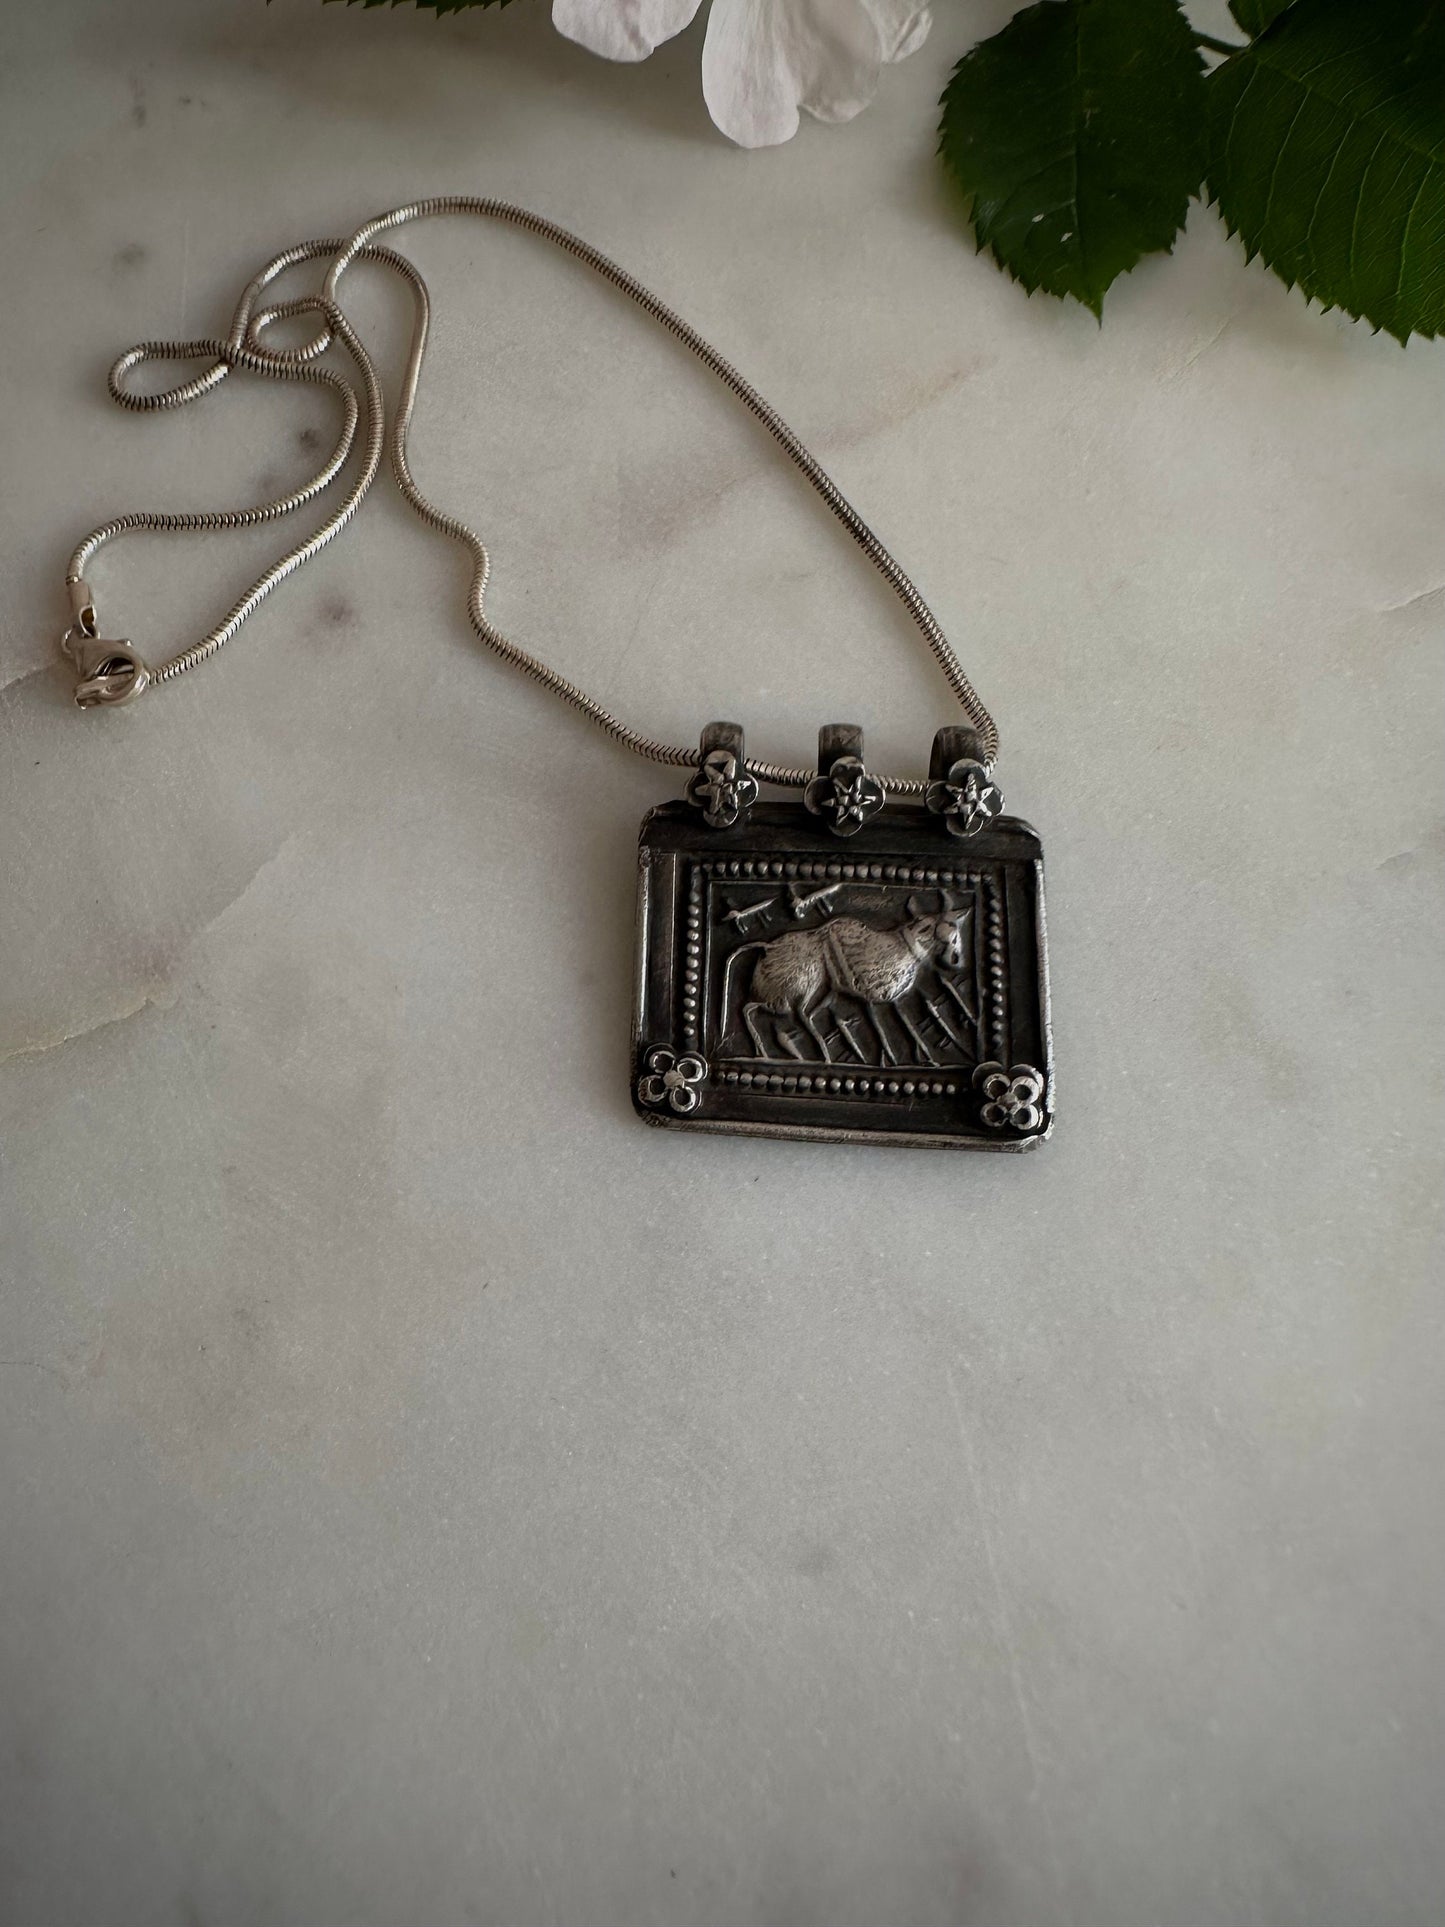 Antique old vintage Holy cow silver amulet from Rajasthan, India